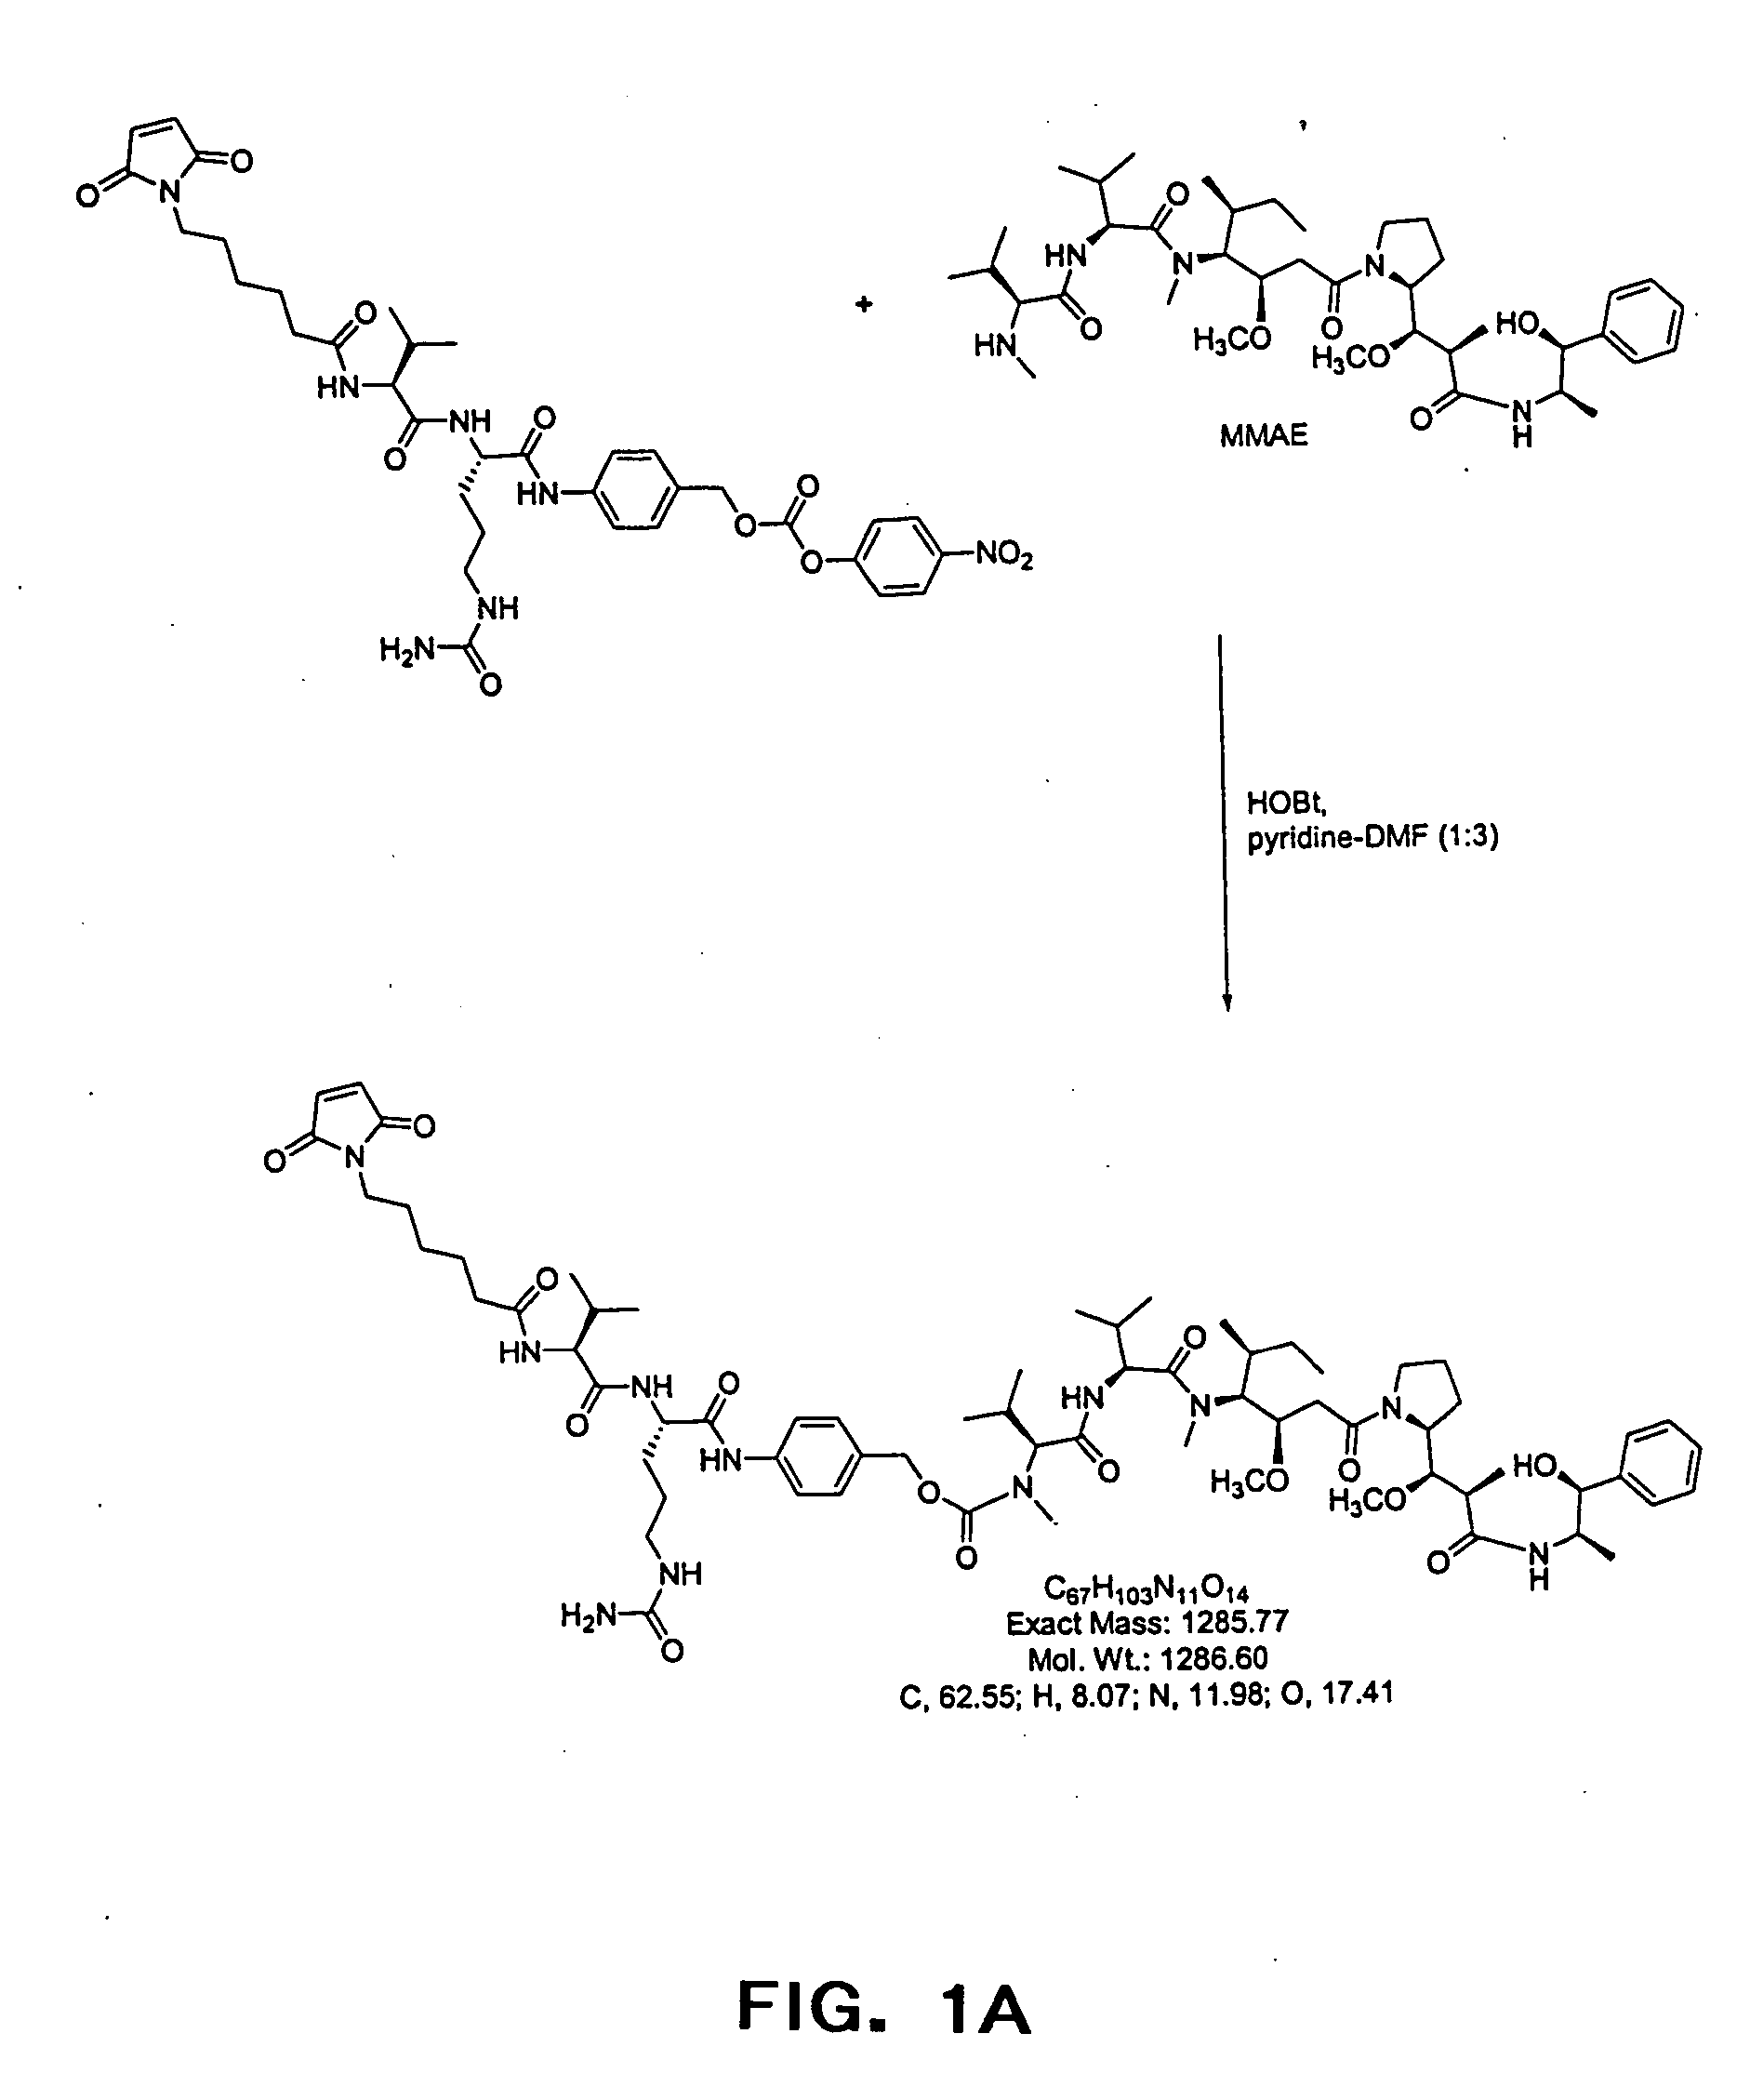 Anti-CD20 antibody-drug conjugates for the treatment of cancer and immune disorders